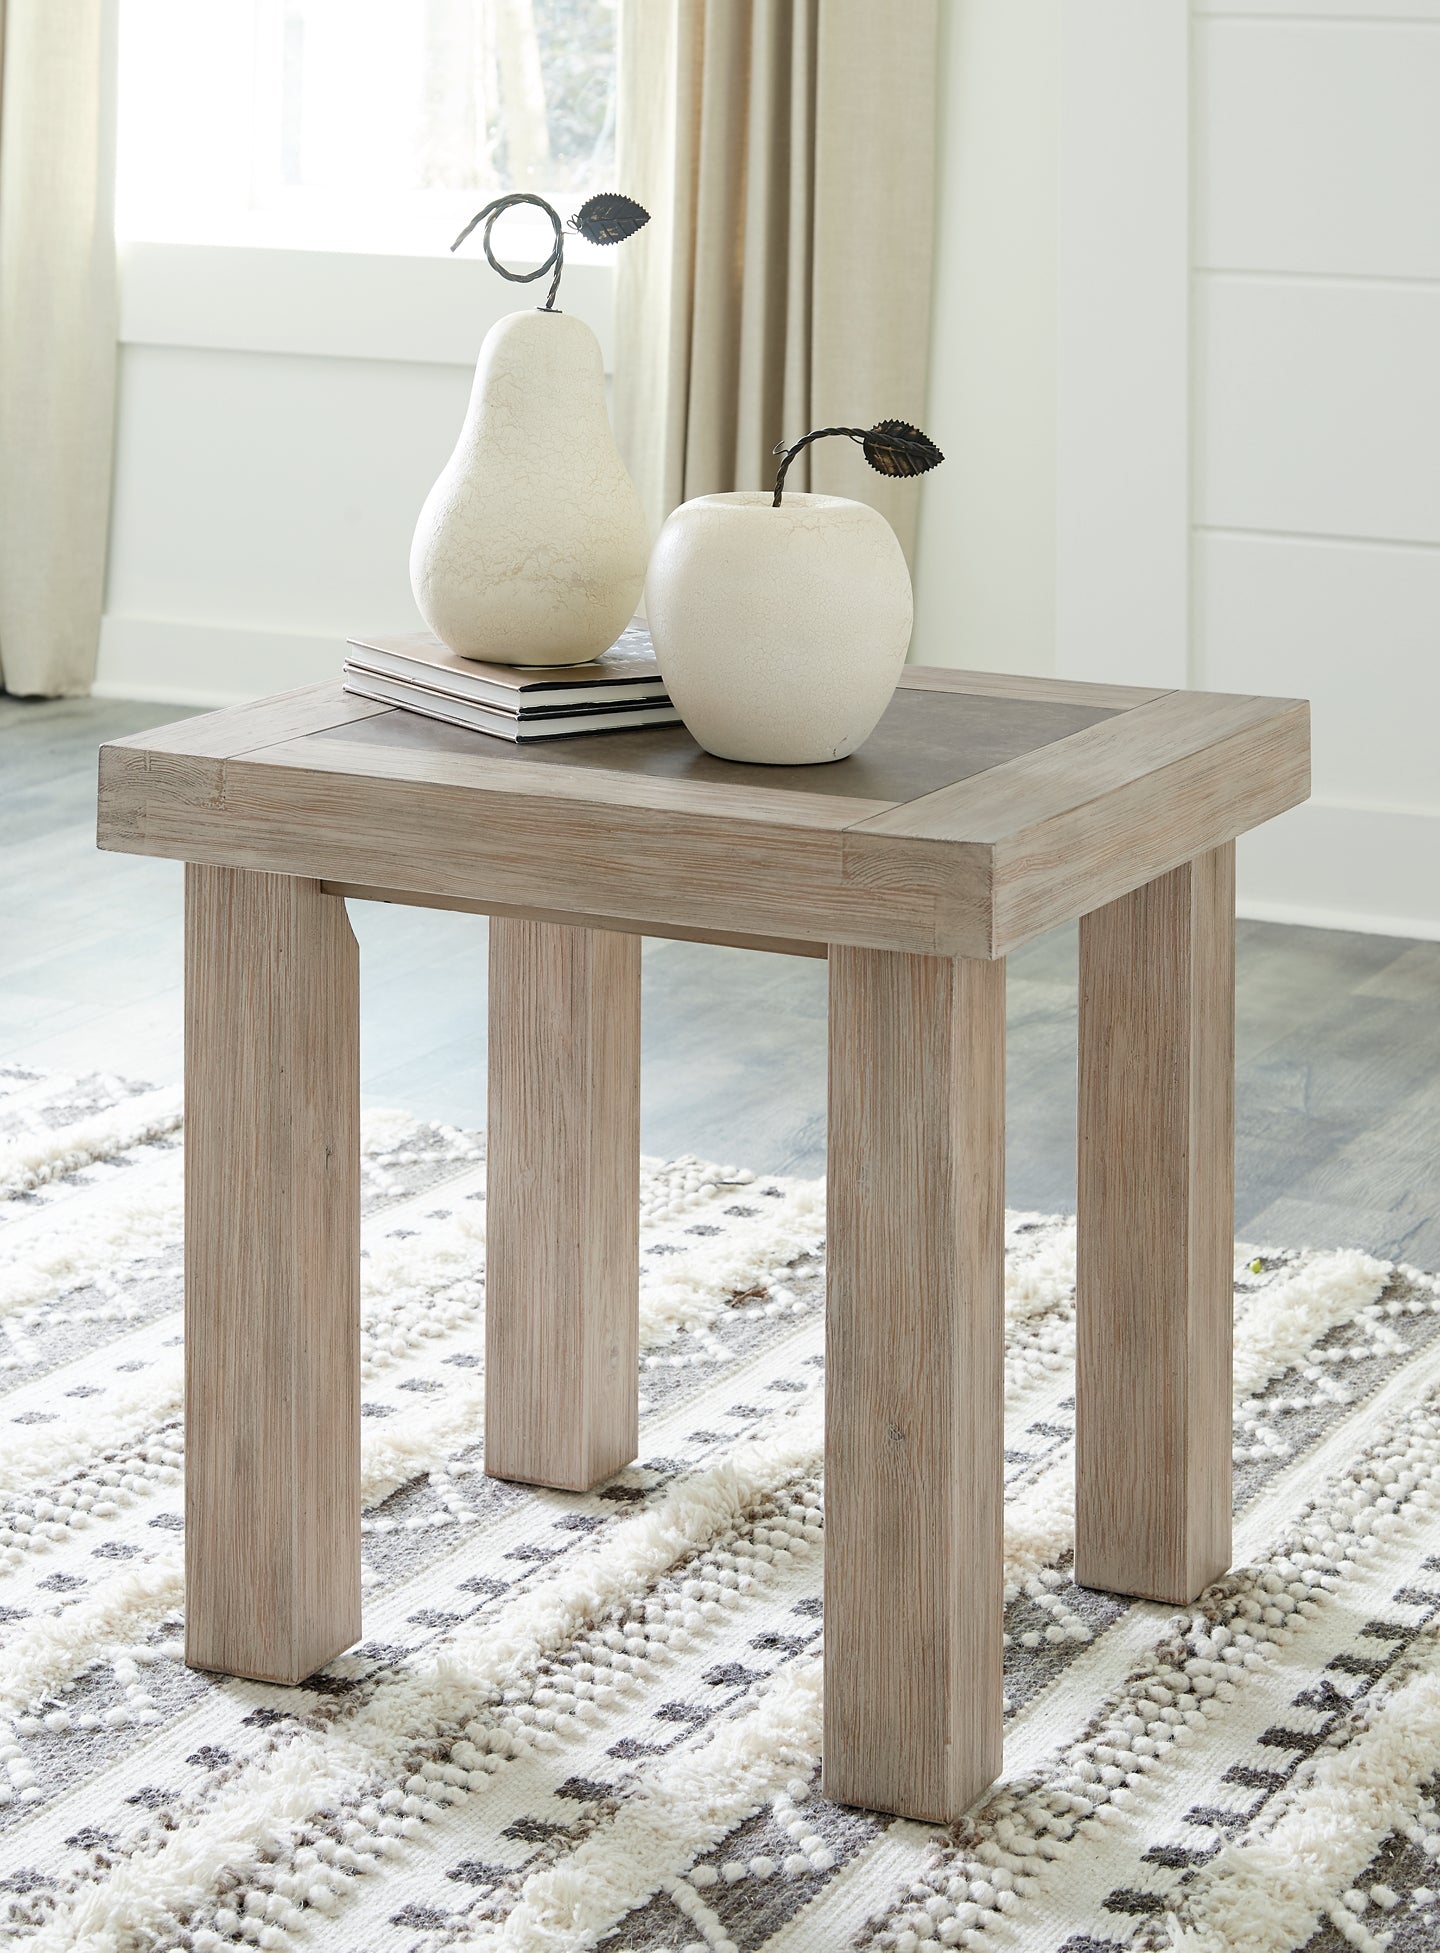 Hennington Coffee Table with 2 End Tables at Walker Mattress and Furniture Locations in Cedar Park and Belton TX.